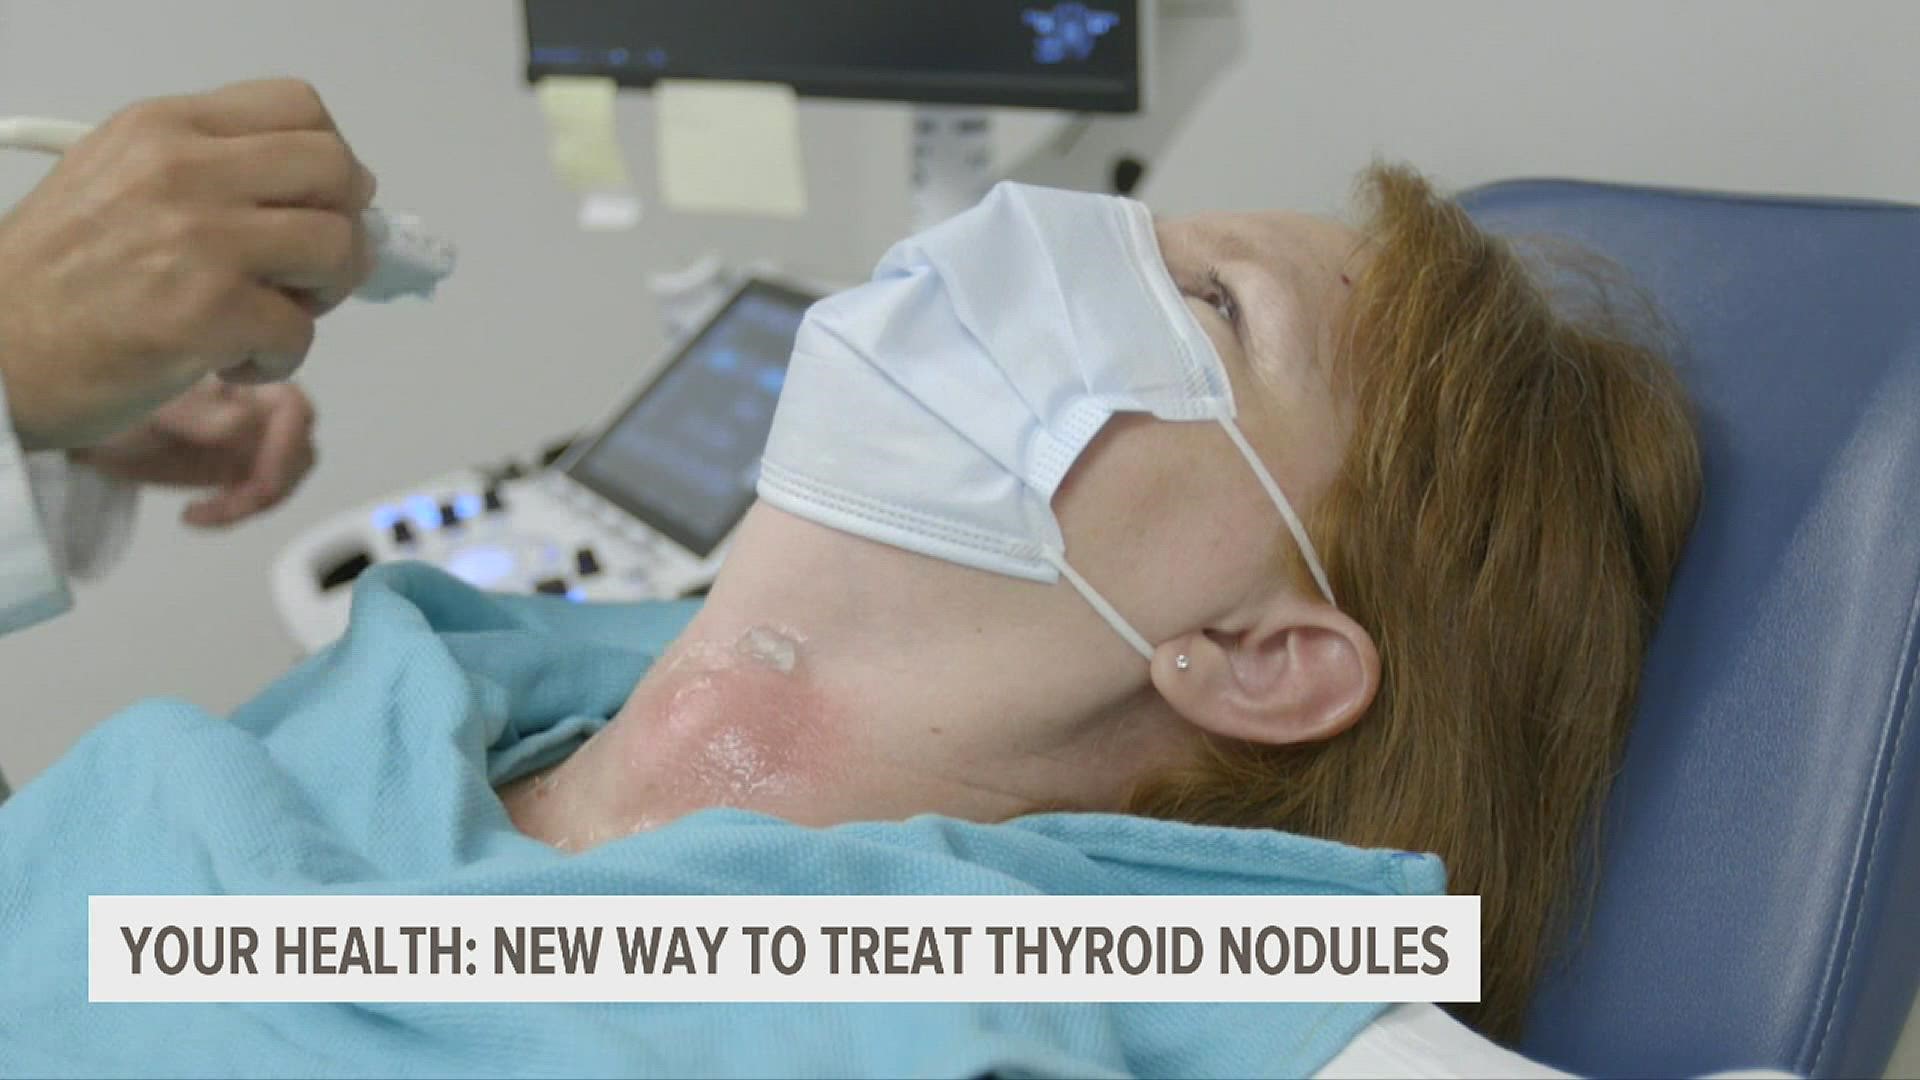 Surgery has been the traditional method to treat thyroid nodules. Now, doctors in Cleveland are using this new way to treat certain patients.